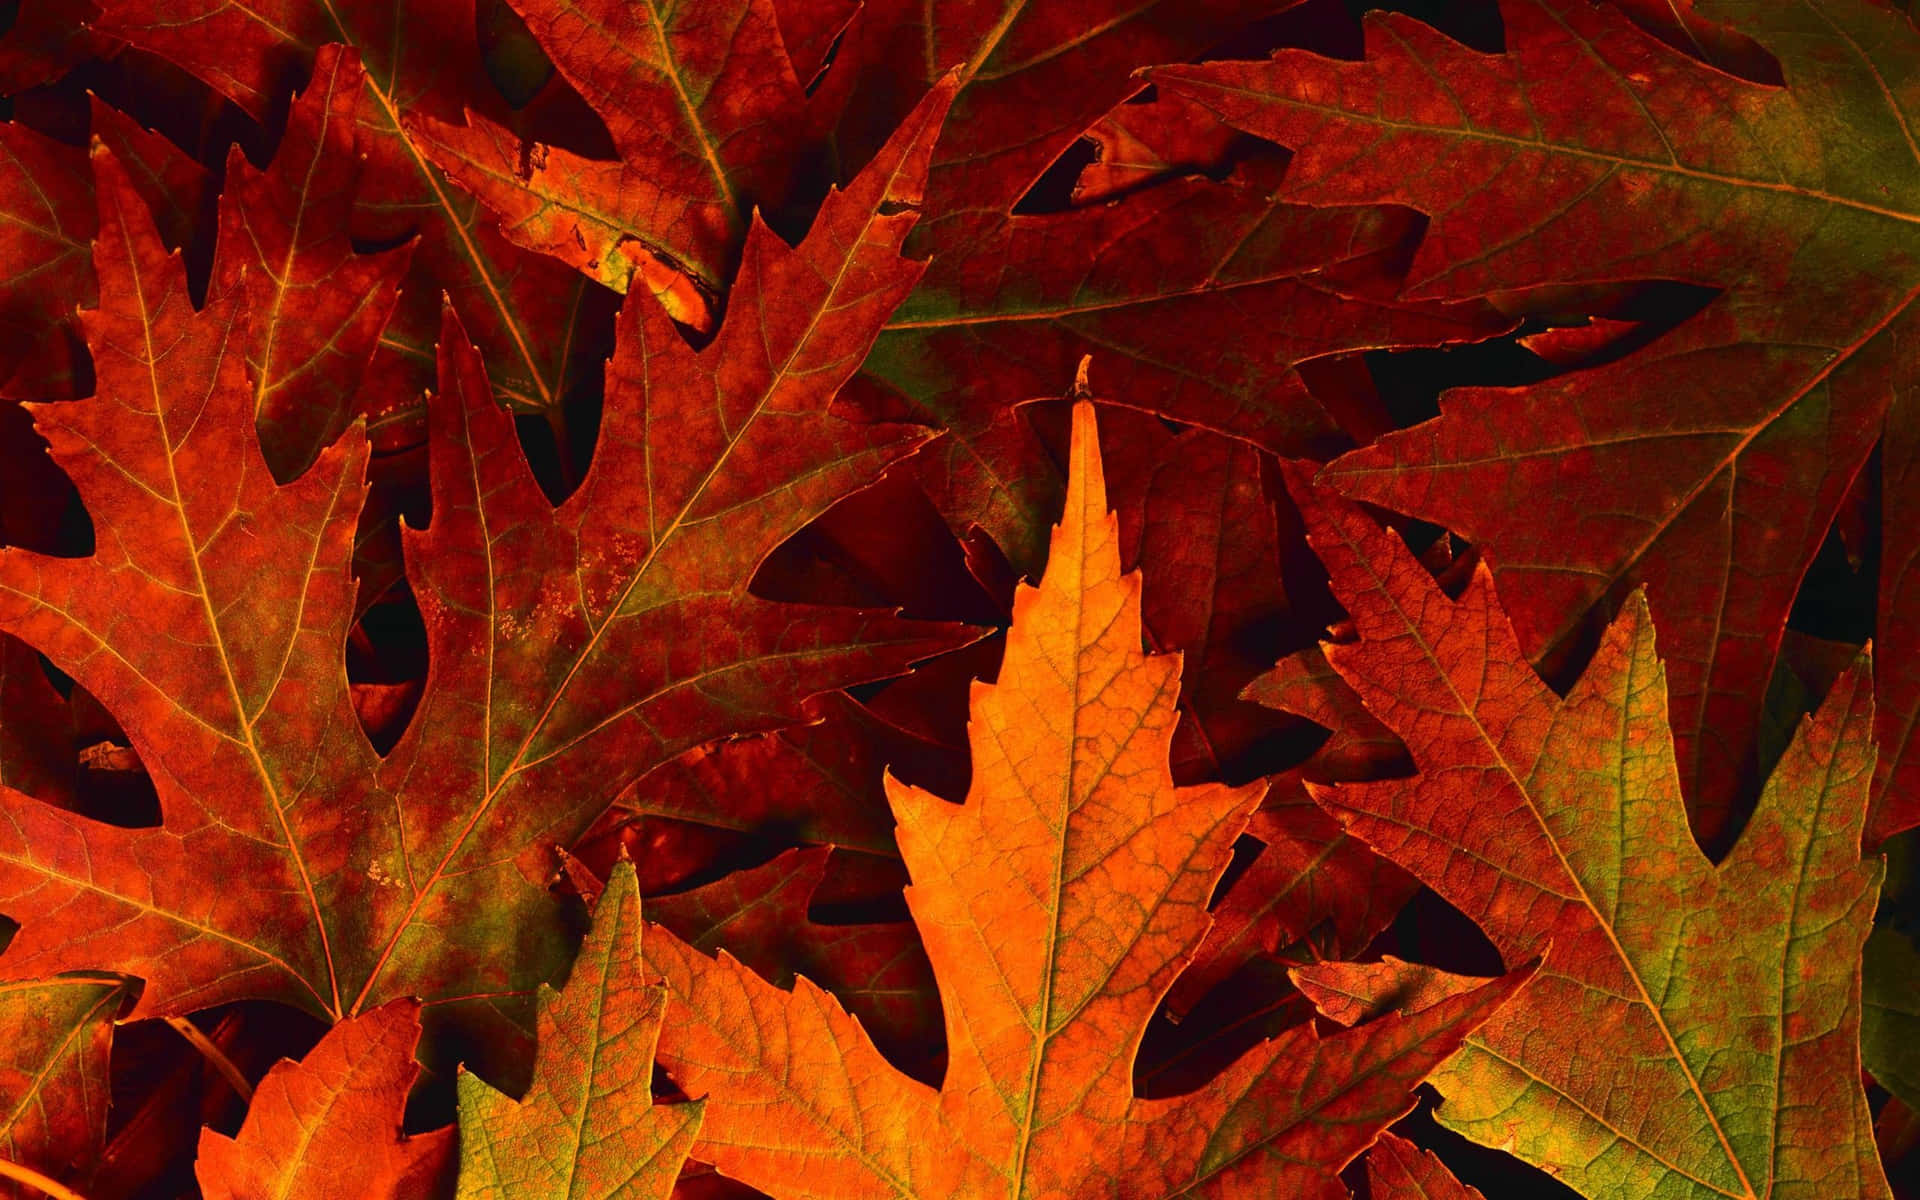 Red, yellow and orange fall leaves set against a textured background.